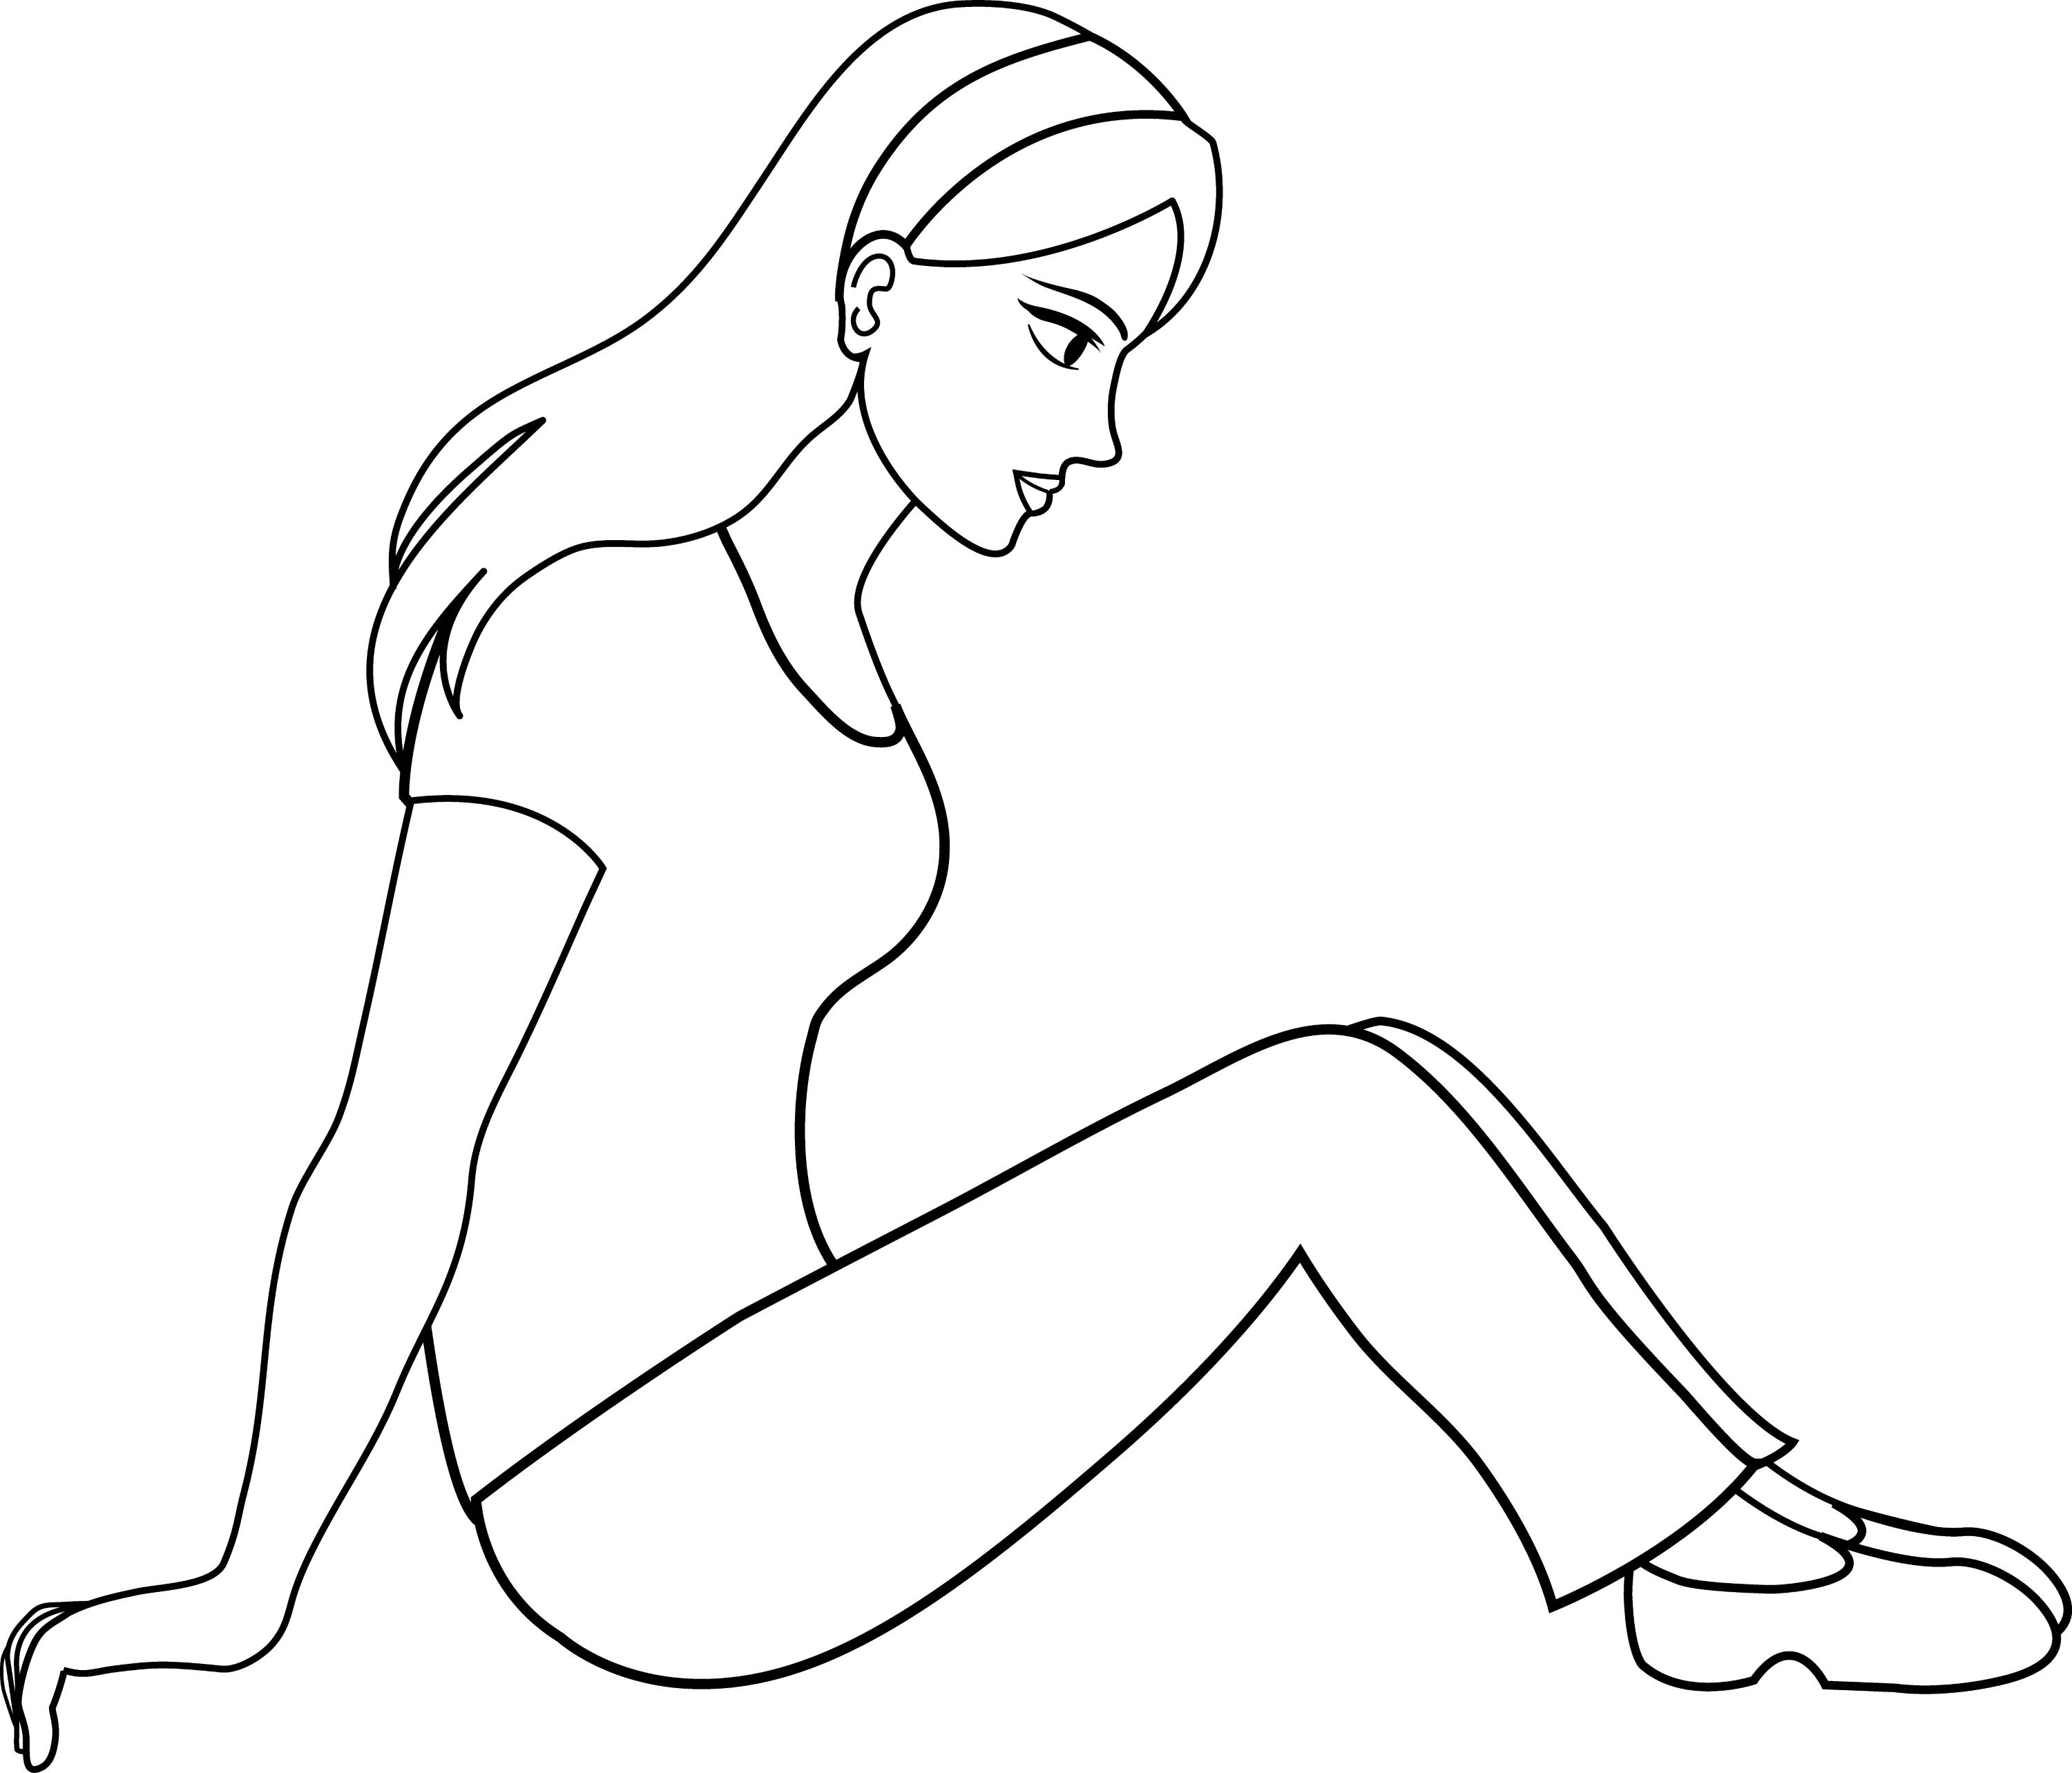 Colorable Line Art of Sitting Woman Free Clip Art